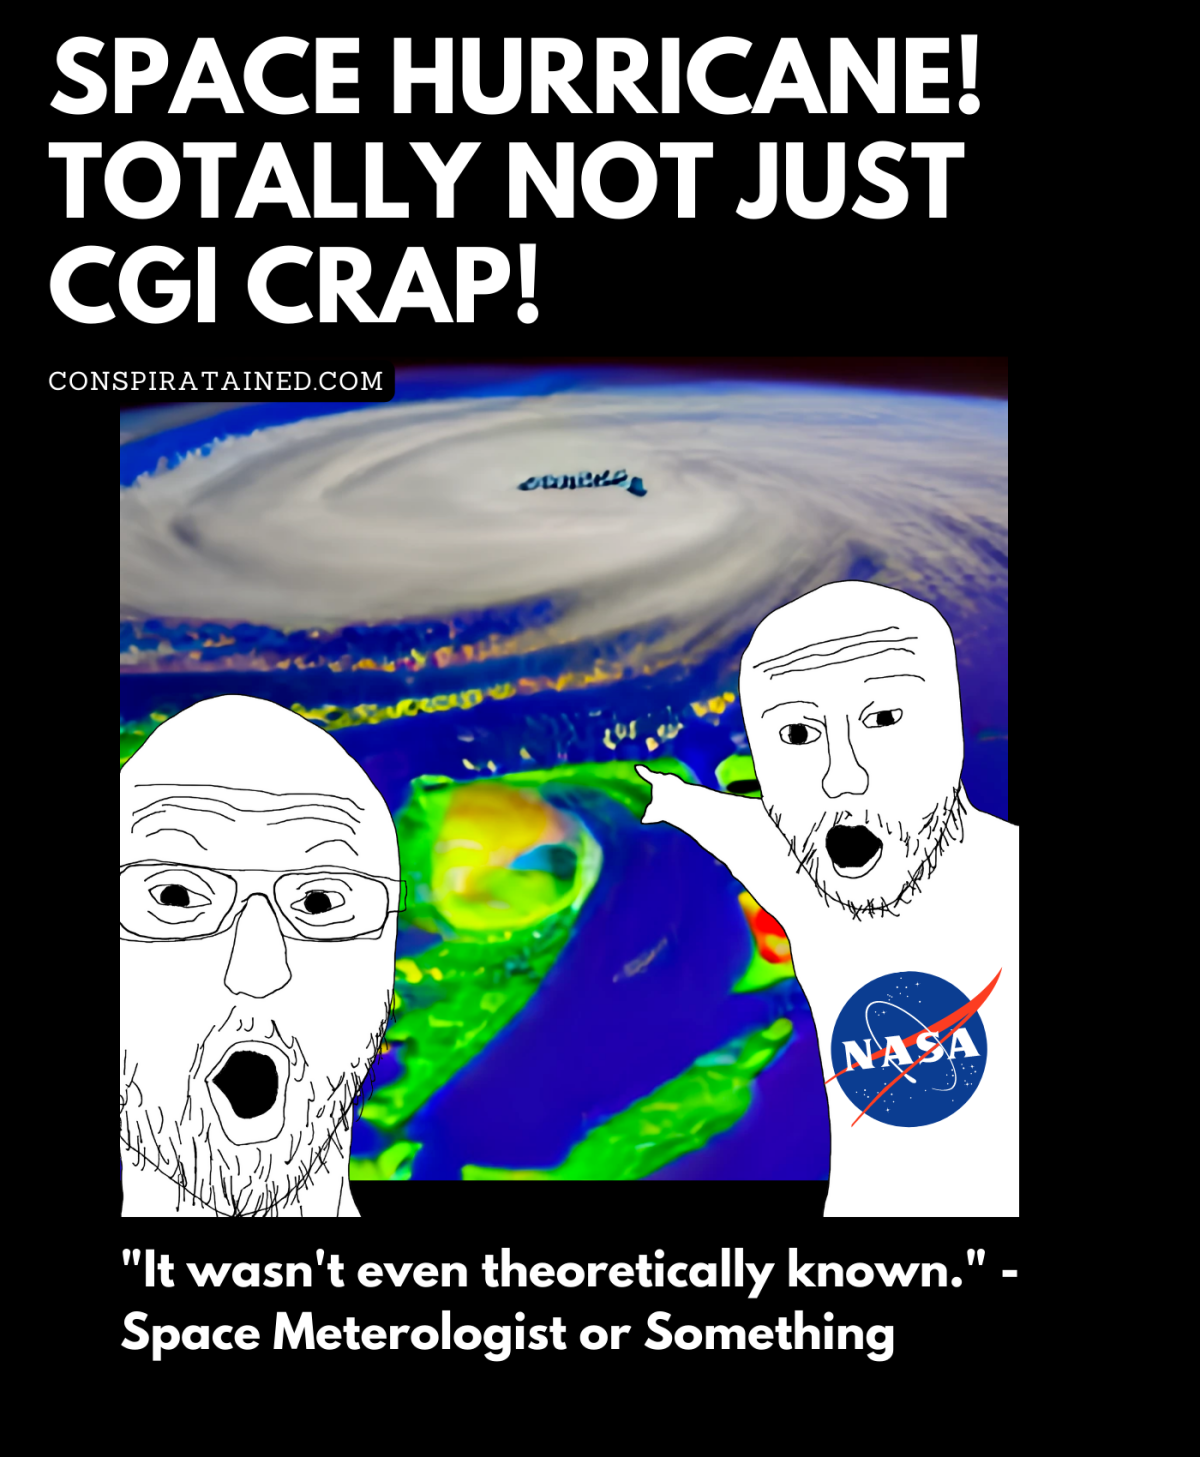 Newly Discovered “Space Hurricanes” Easily Confused With CGI Crap